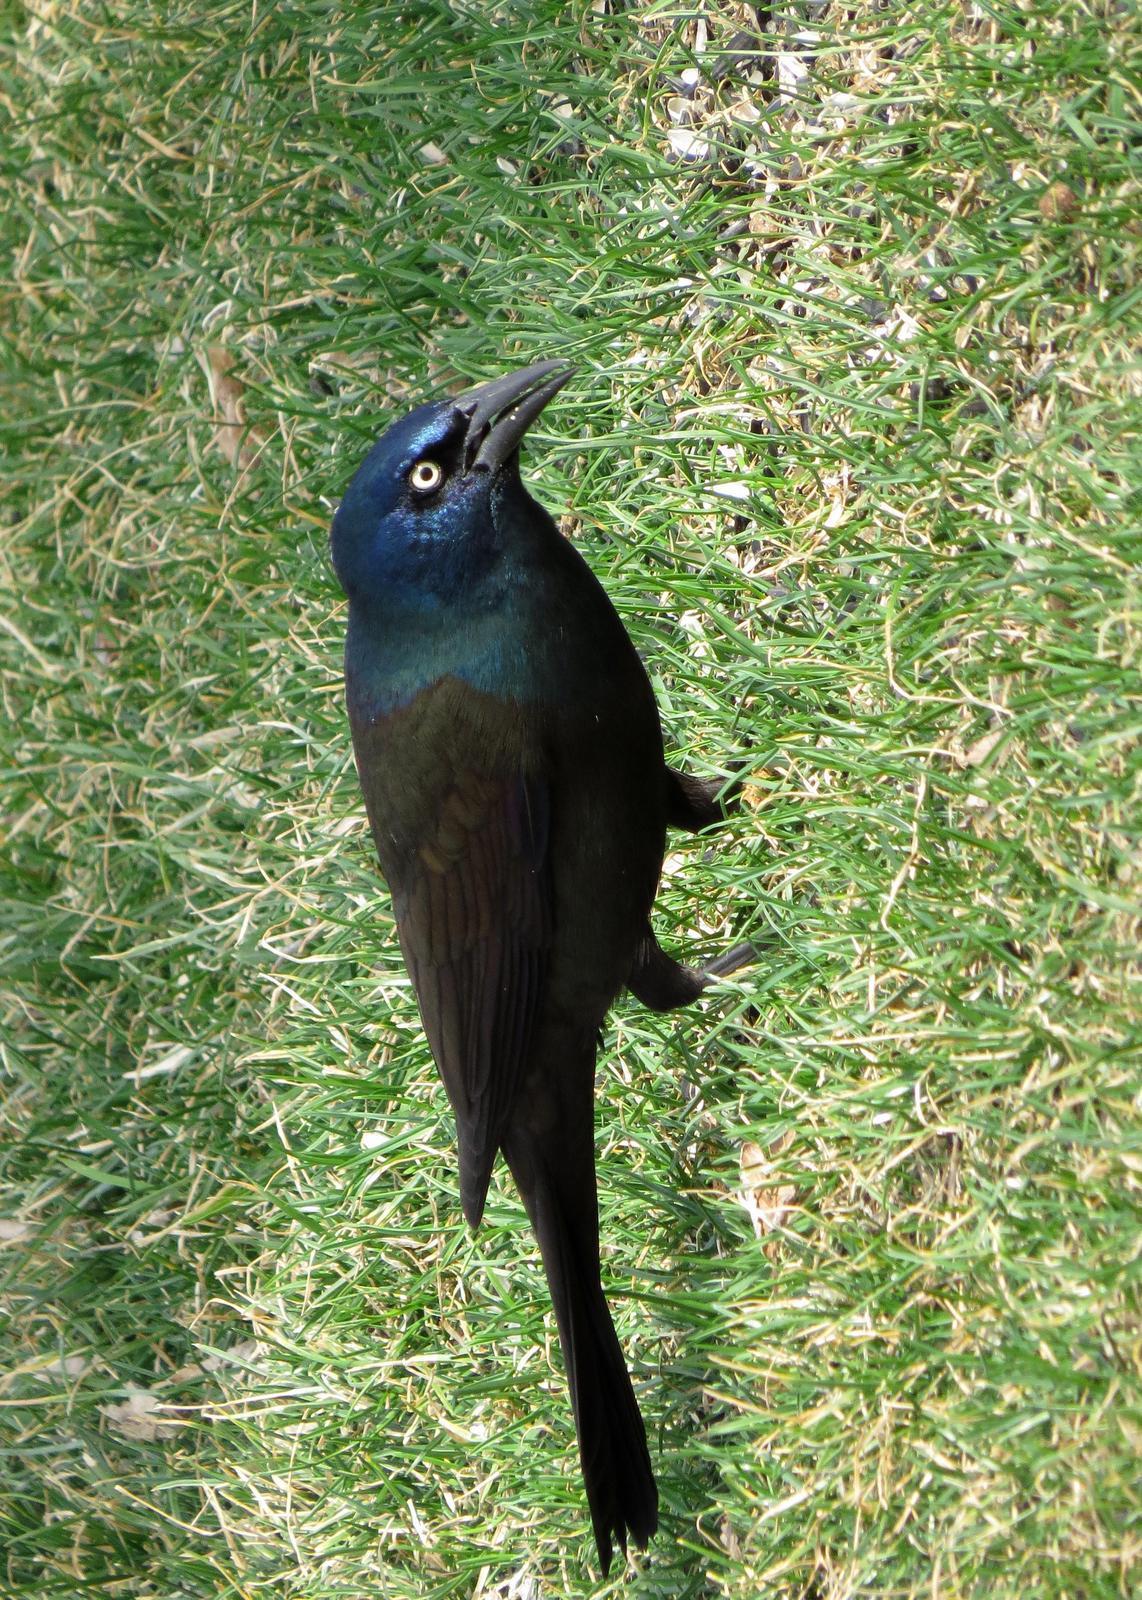 Common Grackle Photo by Kelly Preheim